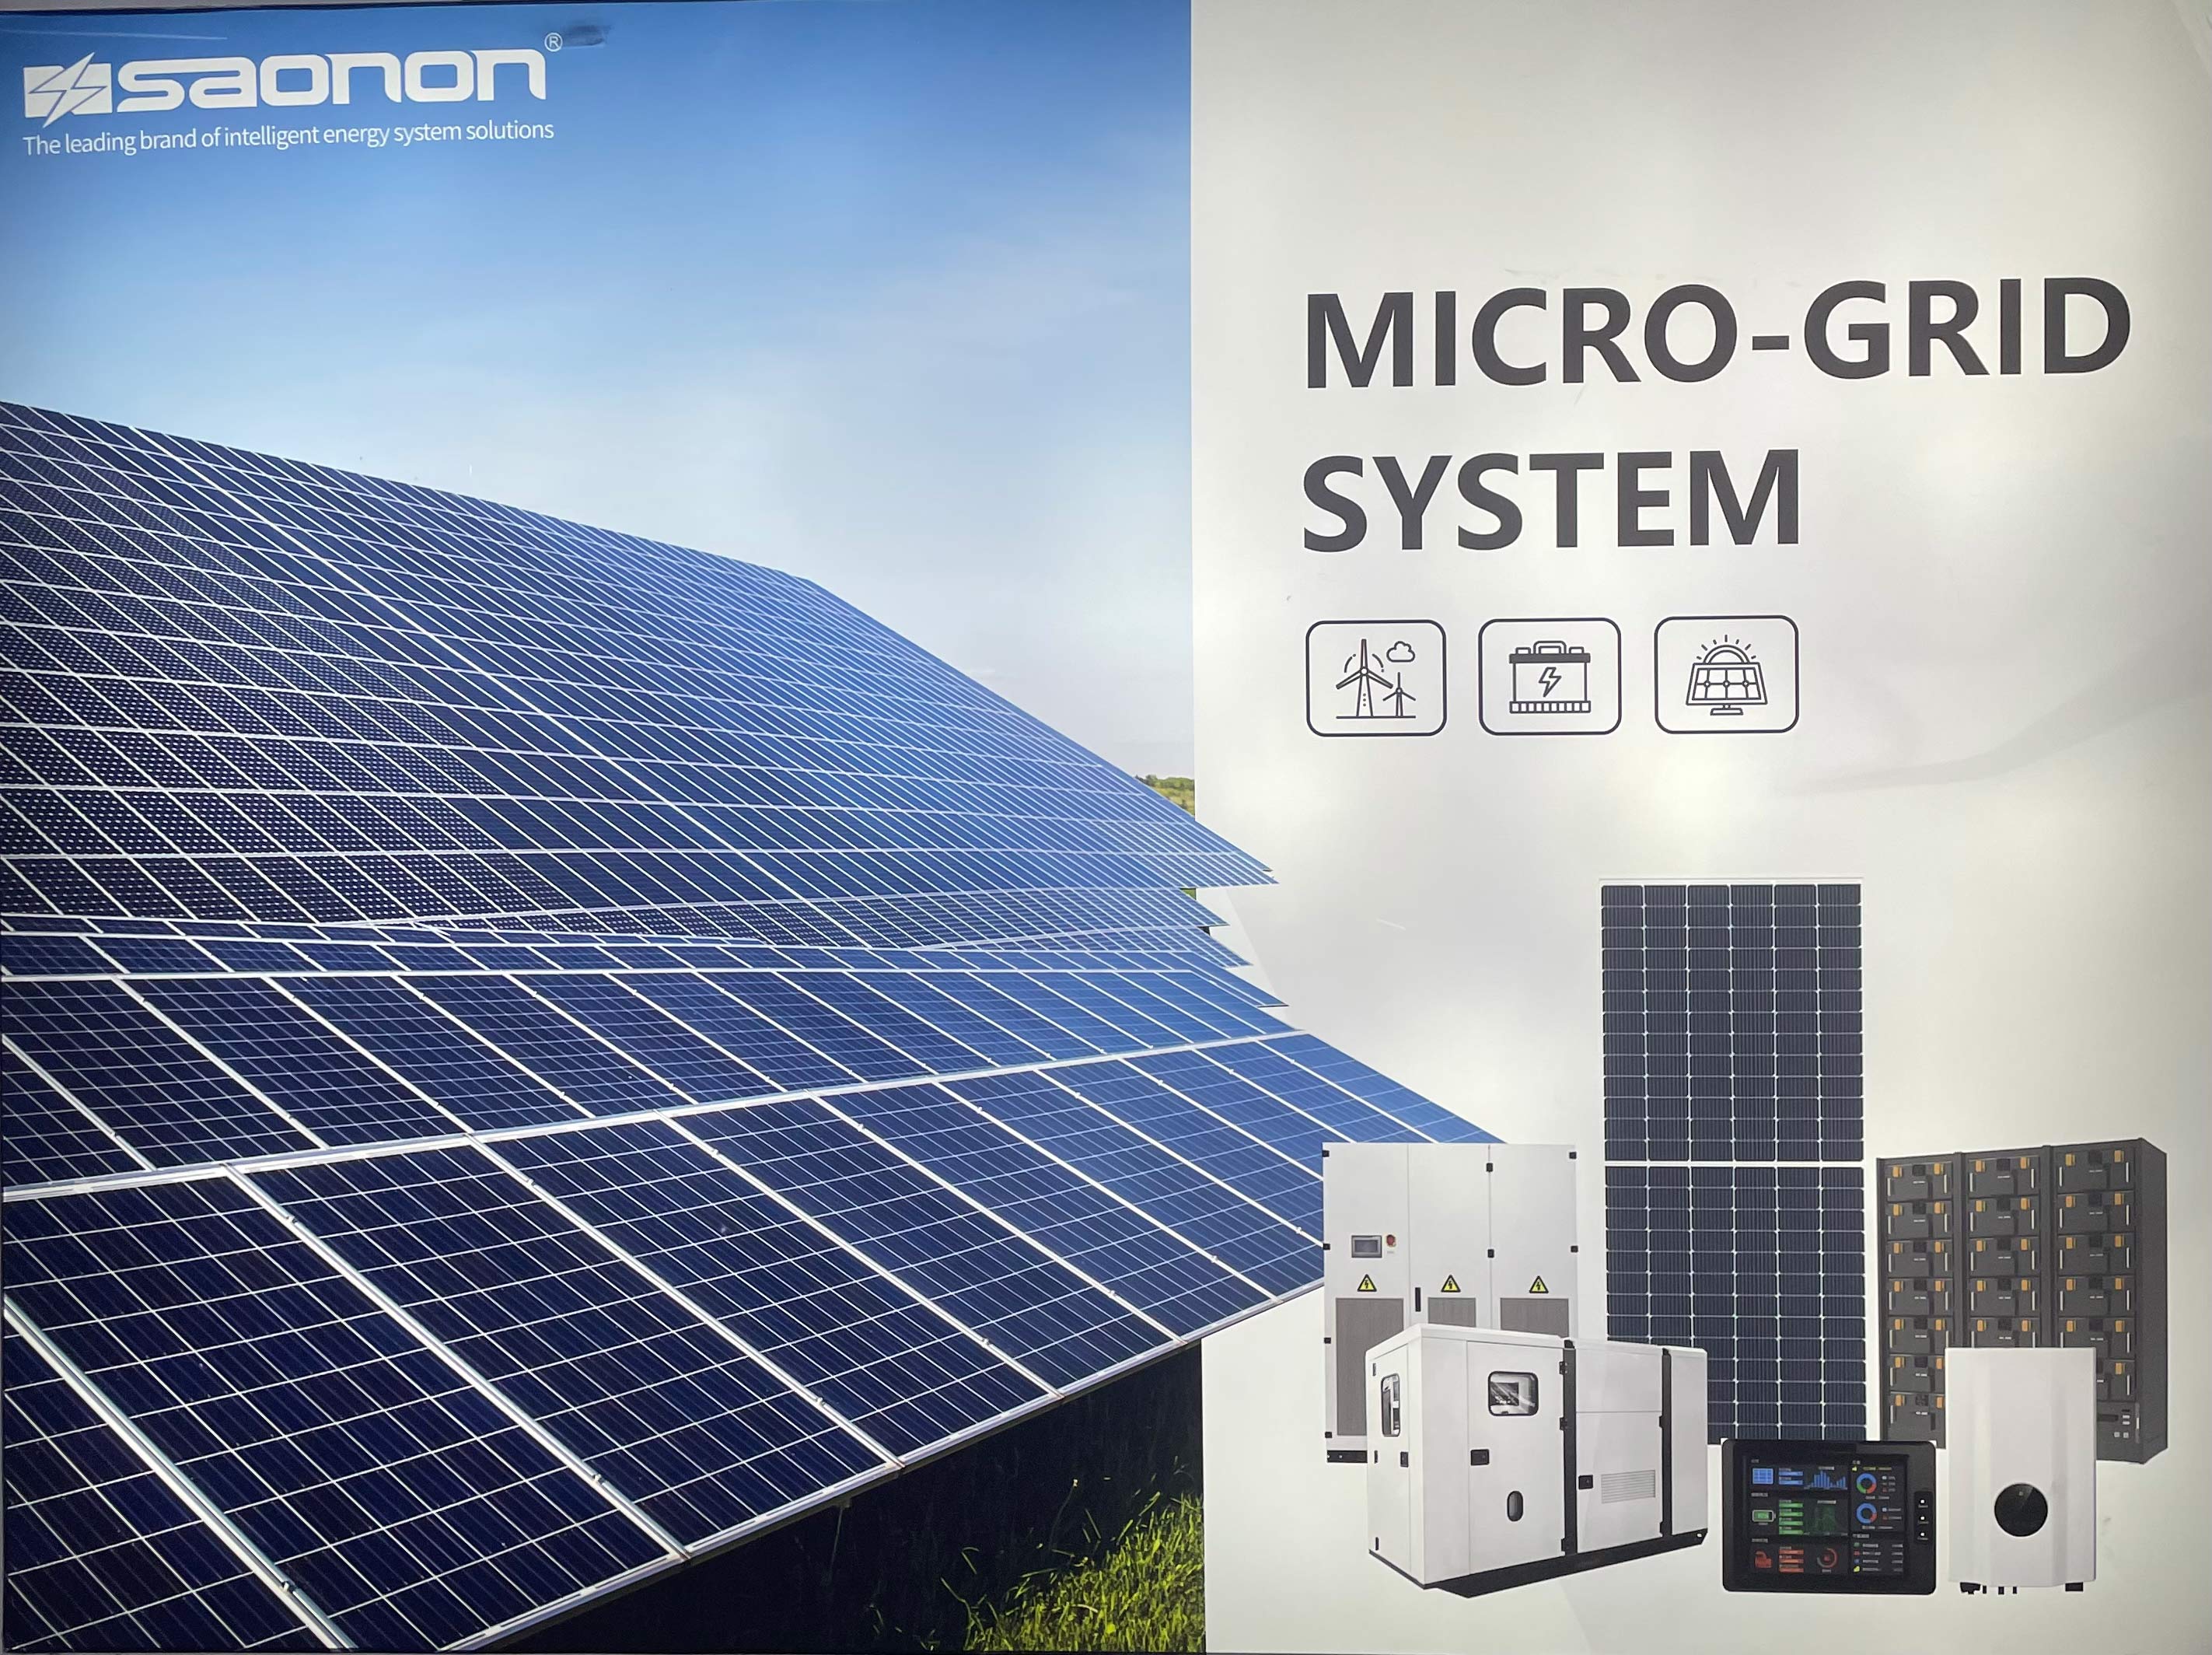 Wanons Micro-grid System debuted at the 133rd Canton Fair